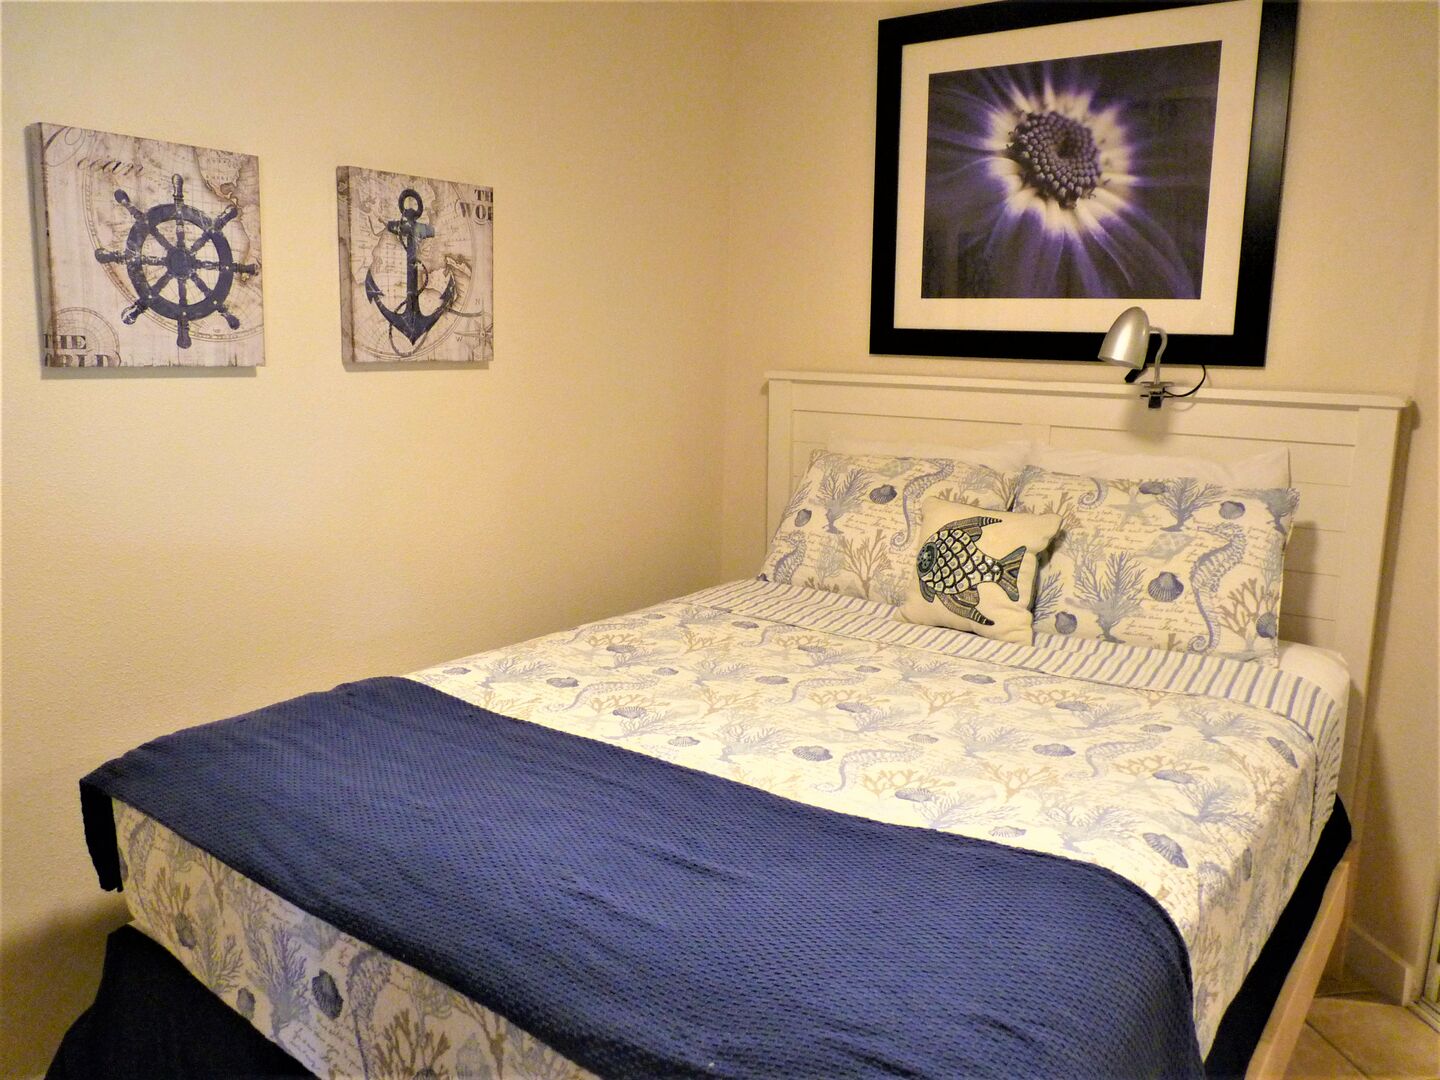 You'll love the relaxing feel to this bedroom. And the comfy bed will please even the pickiest sleeper!